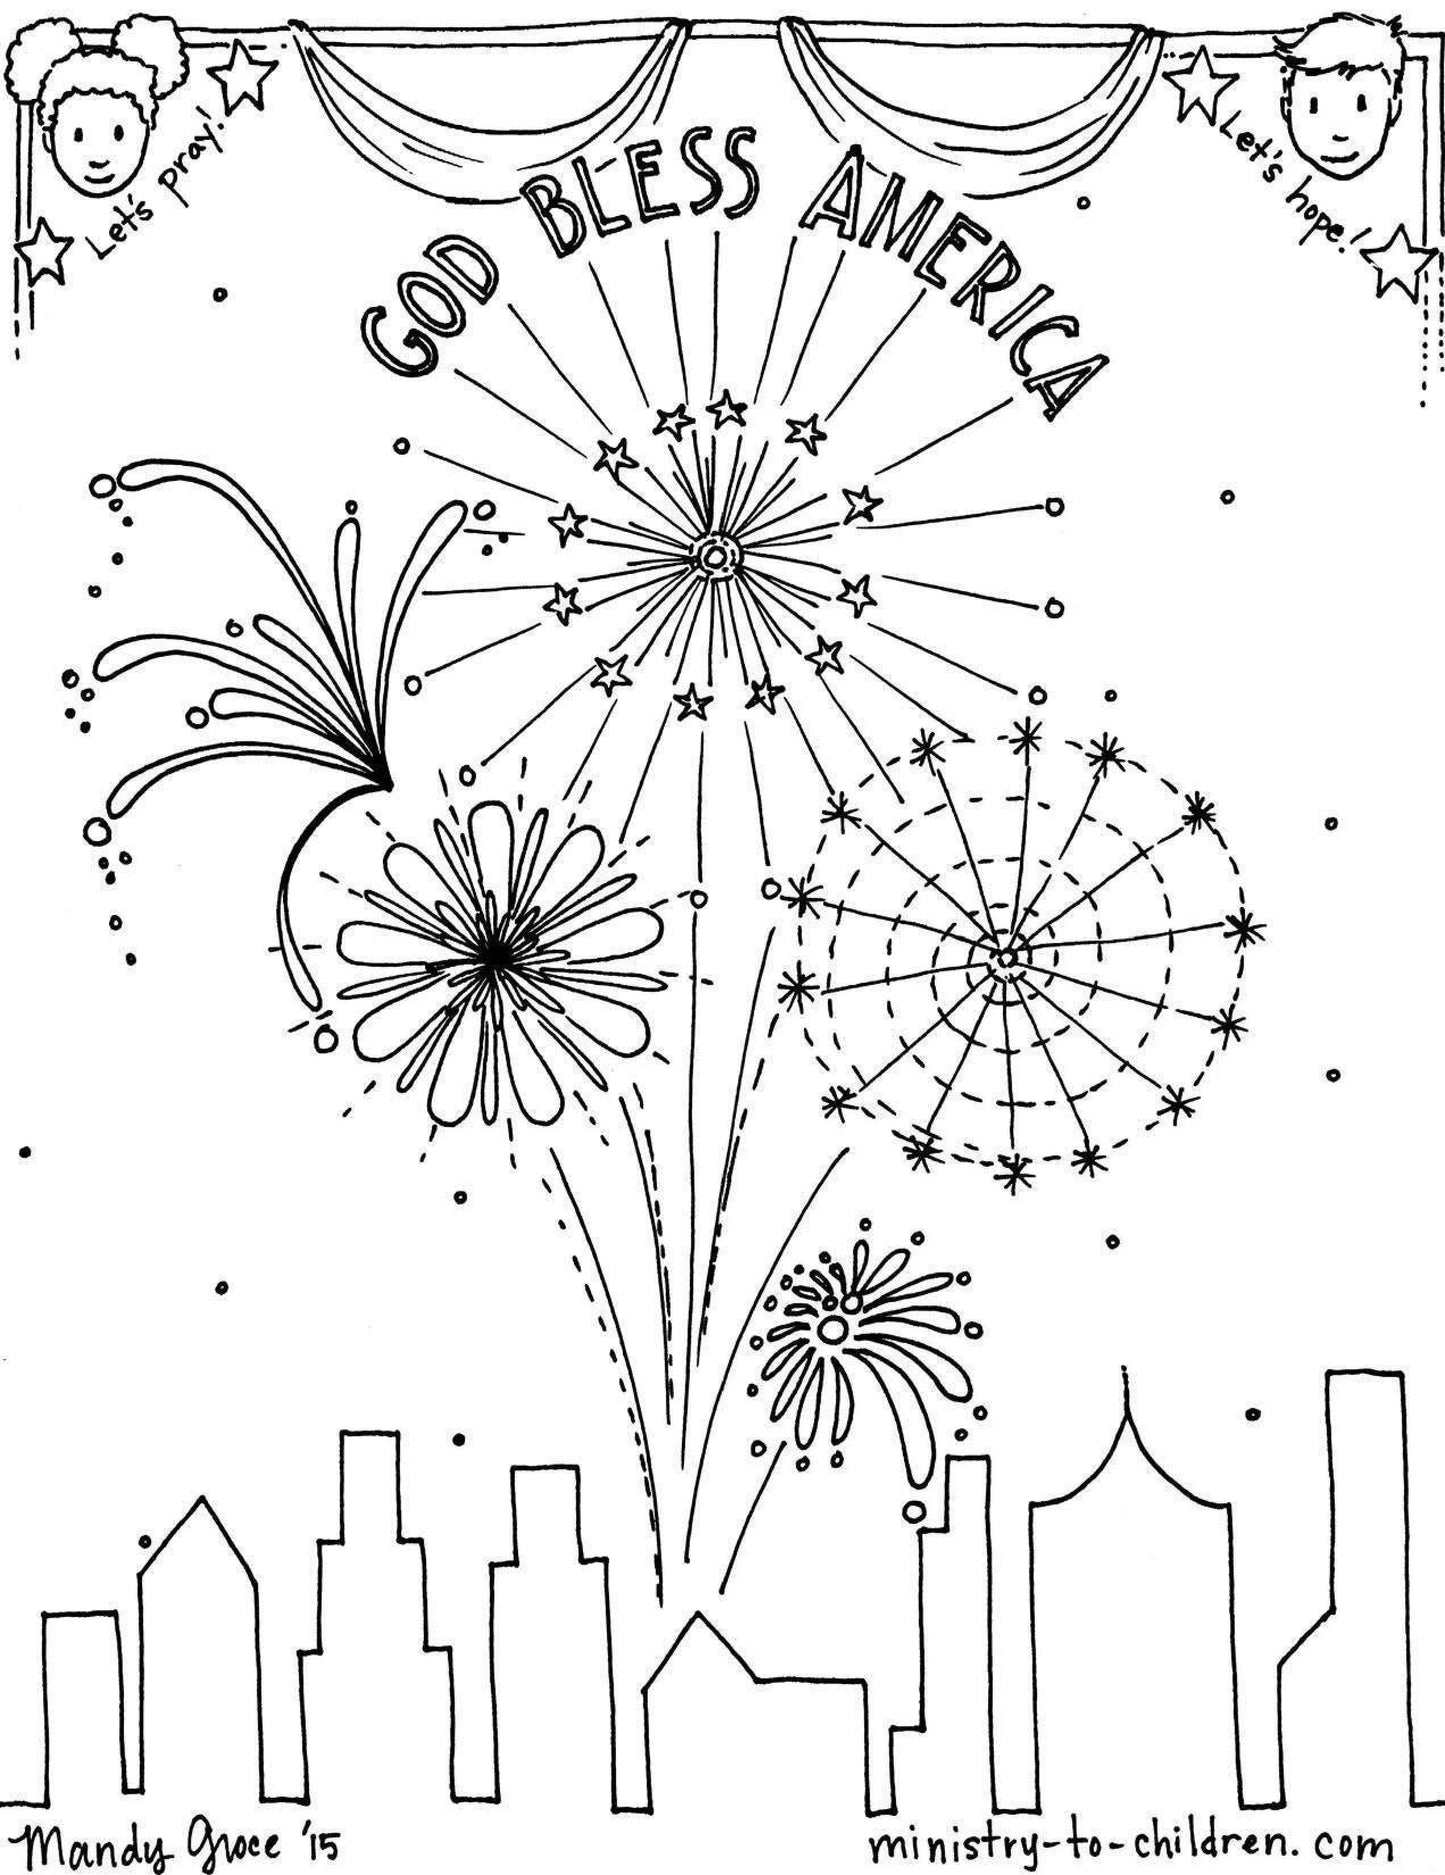 Patriotic Independence Printables (FREE) Coloring Pages for the 4th of July (6 Pages) download only - Sunday School Store 